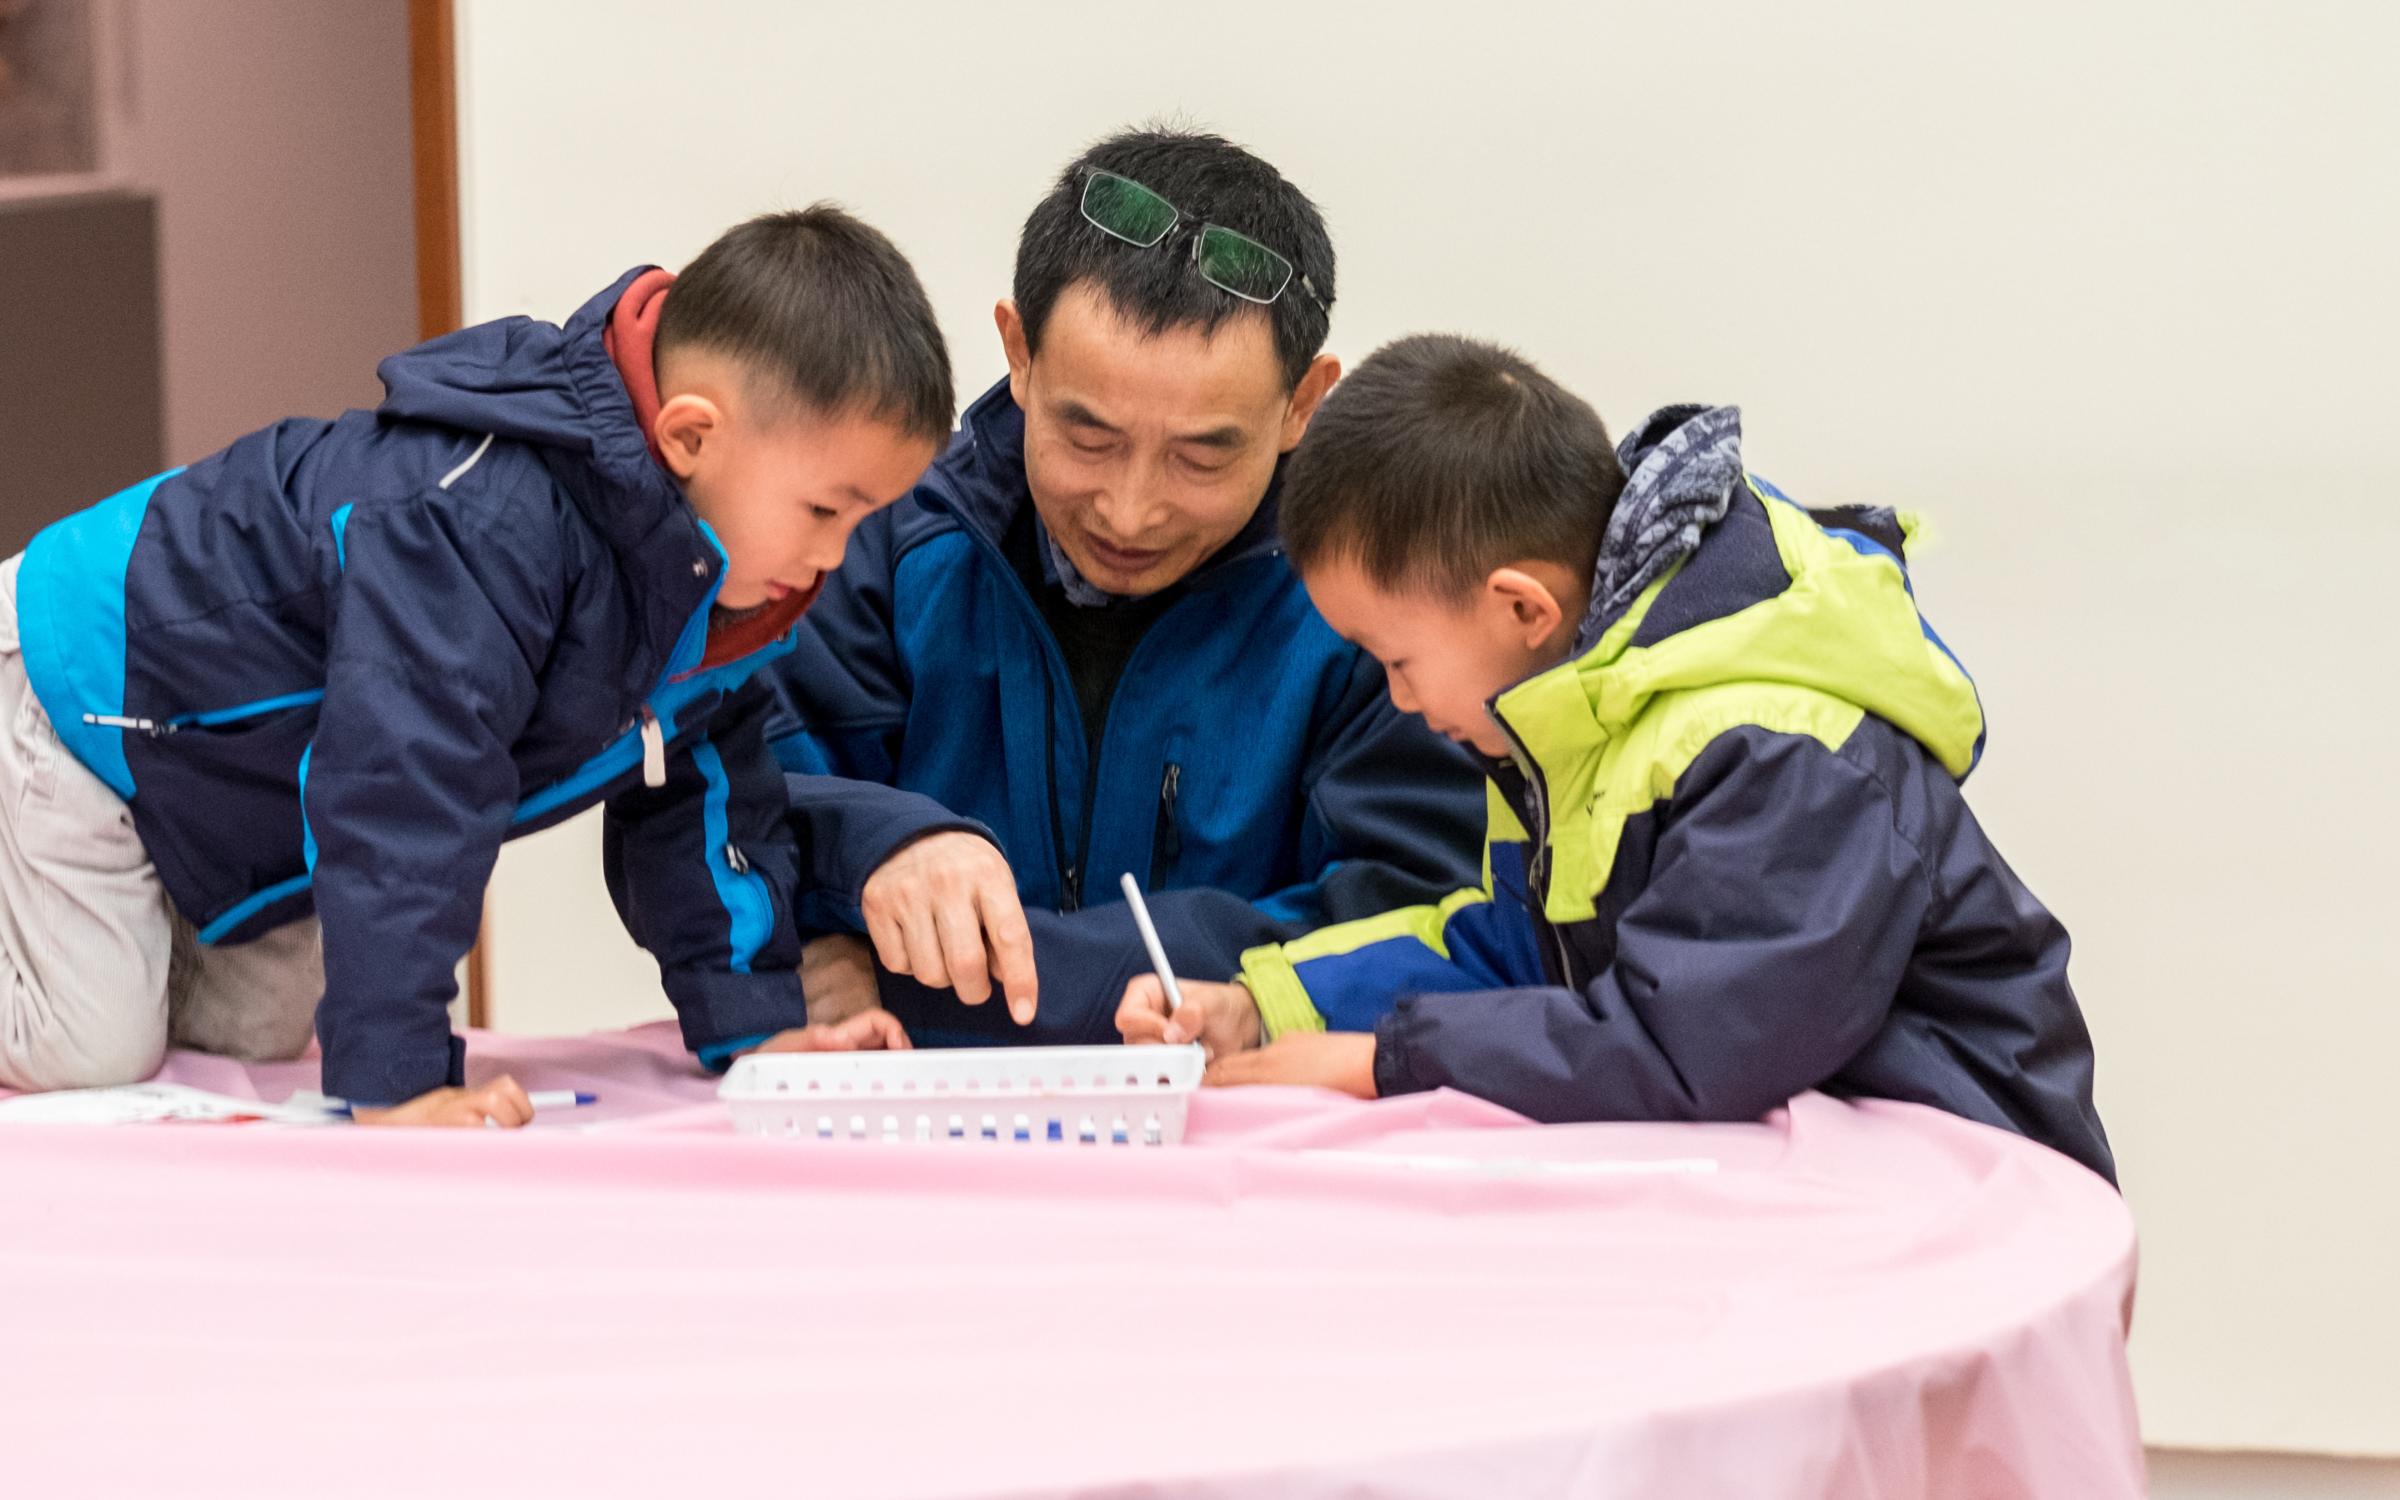 An Asian father and two sons drawing on a table with a pink cloth.